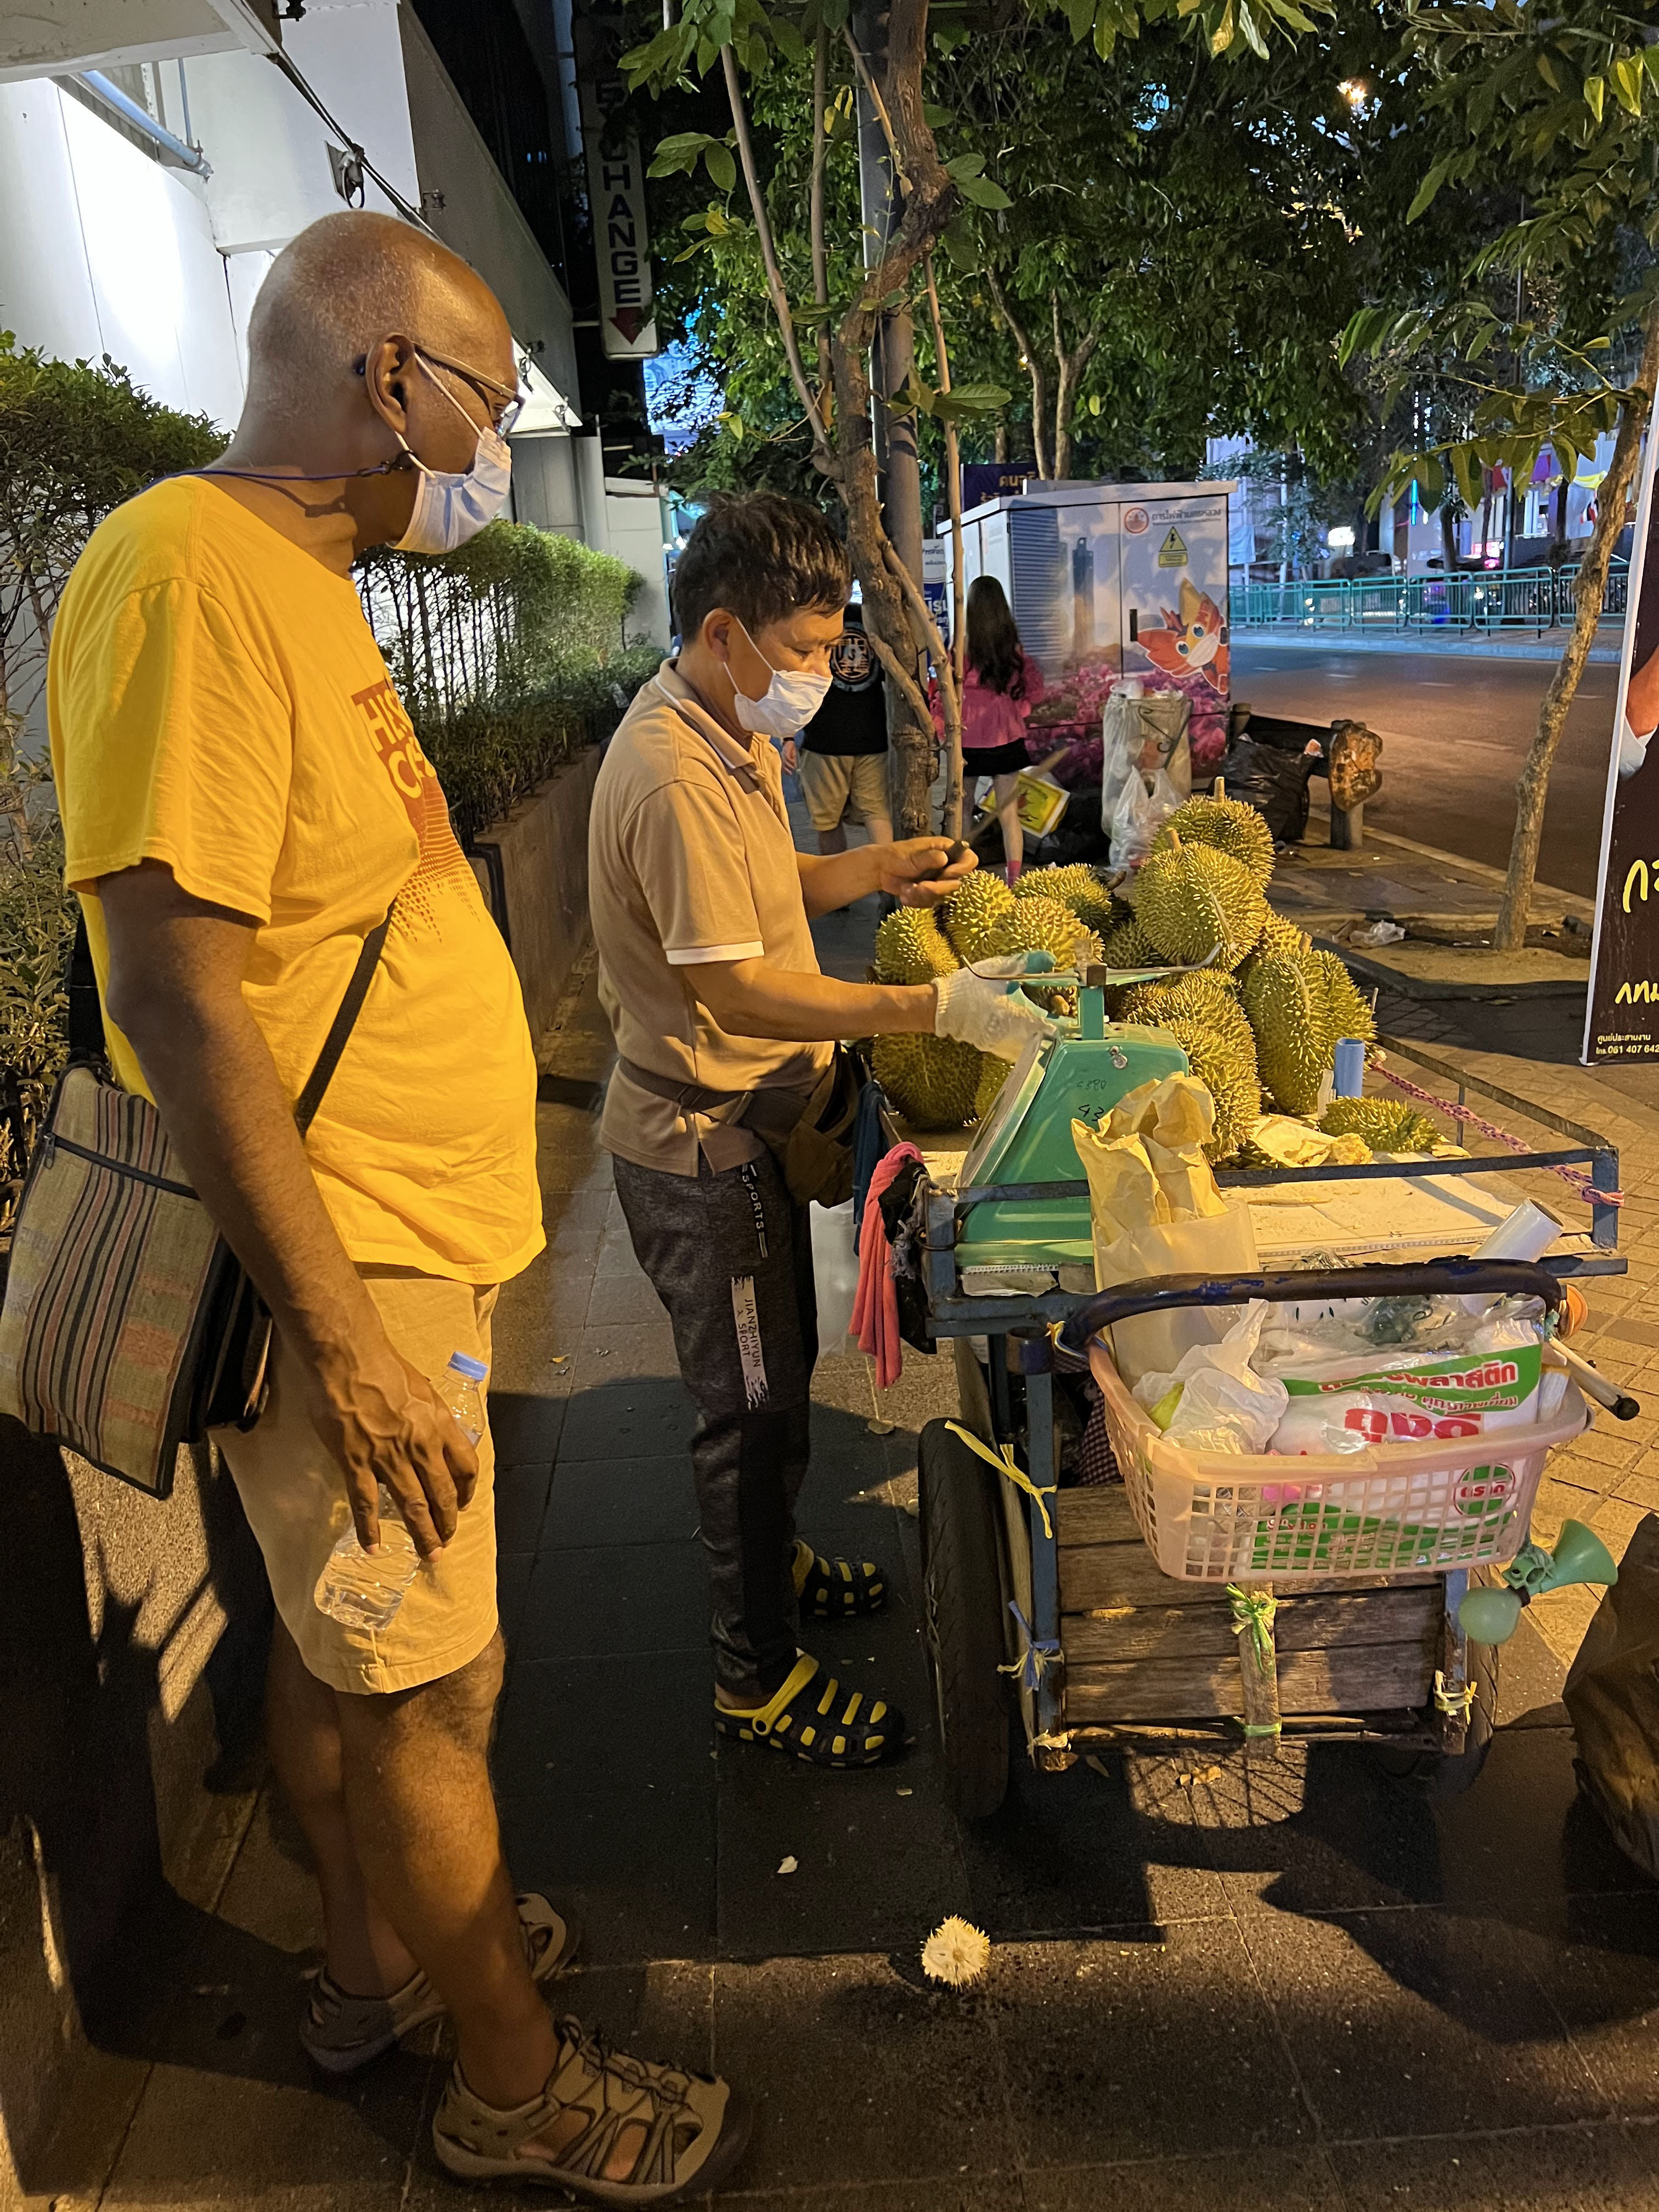 Buying durian fruit from a street vendor